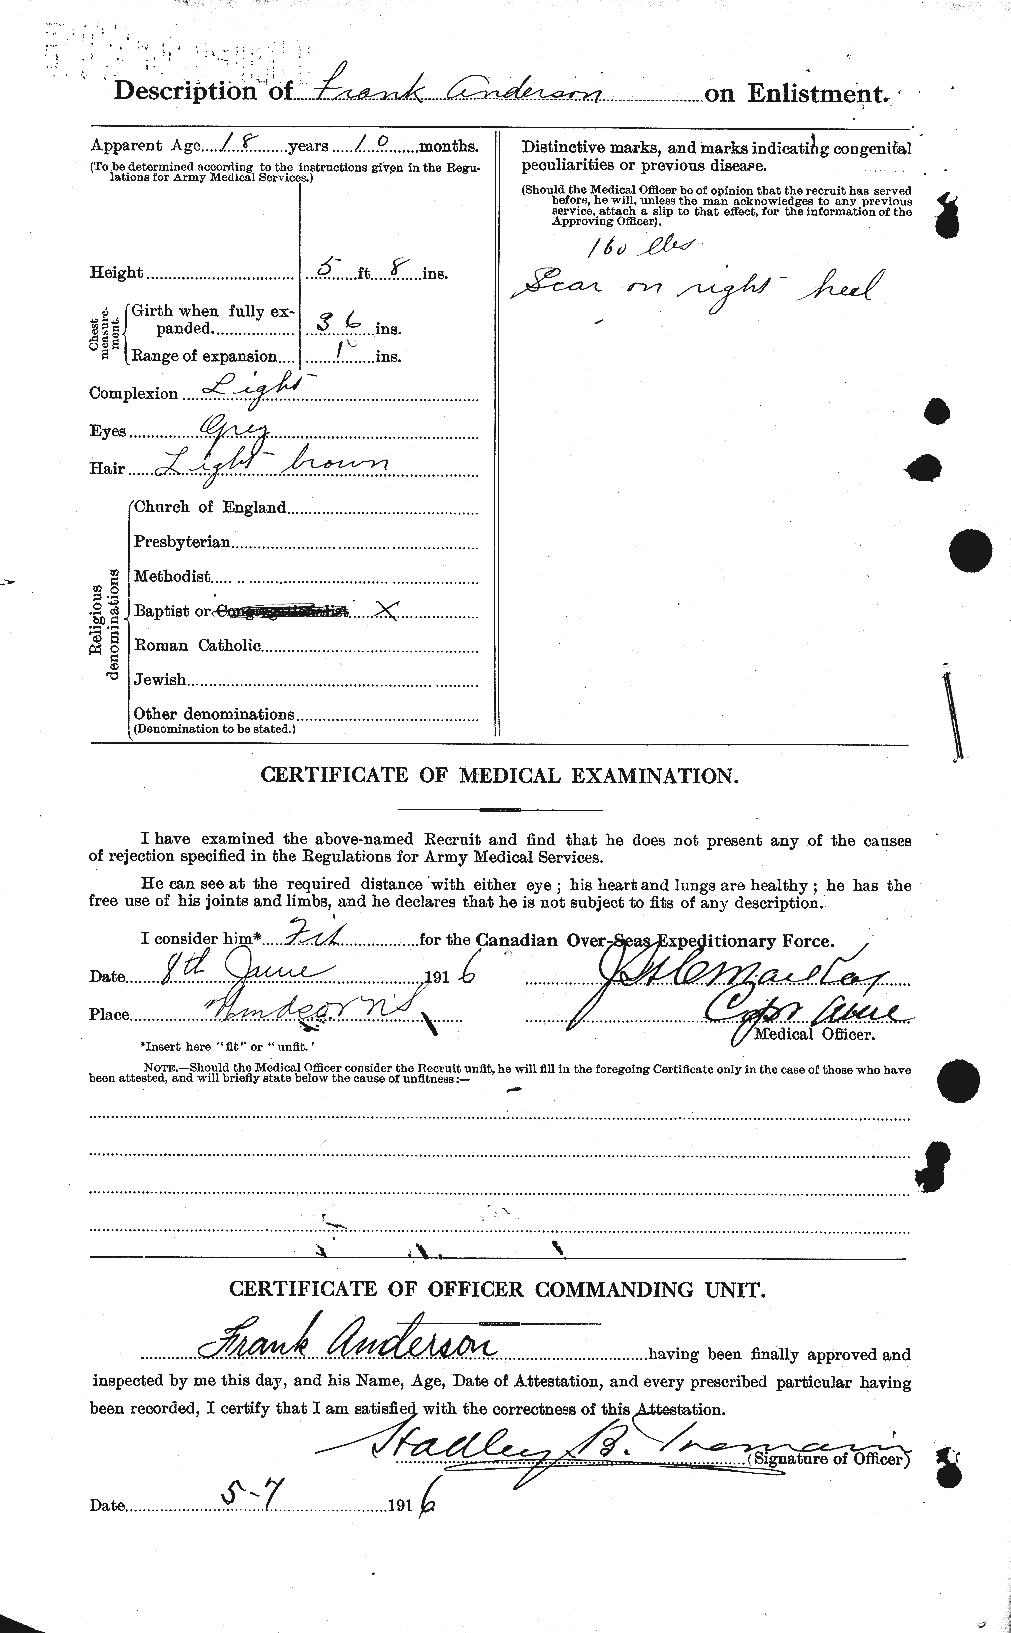 Personnel Records of the First World War - CEF 209857b